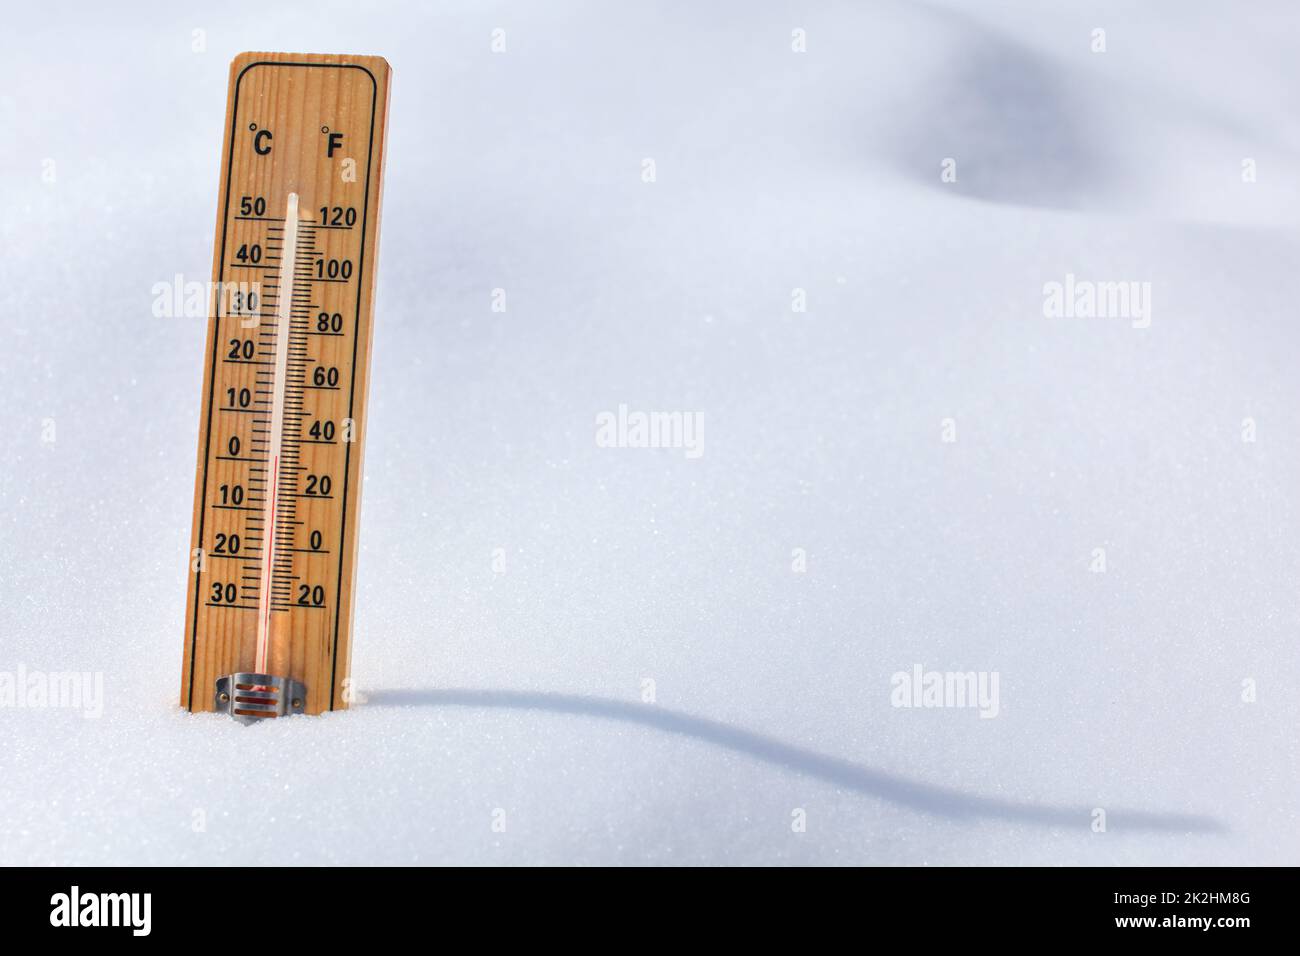 https://c8.alamy.com/comp/2K2HM8G/wooden-thermometer-standing-in-the-snow-sun-casting-curvy-shadow-red-column-showing-0-degrees-celsius-temperature-winter-snow-coming-concept-2K2HM8G.jpg